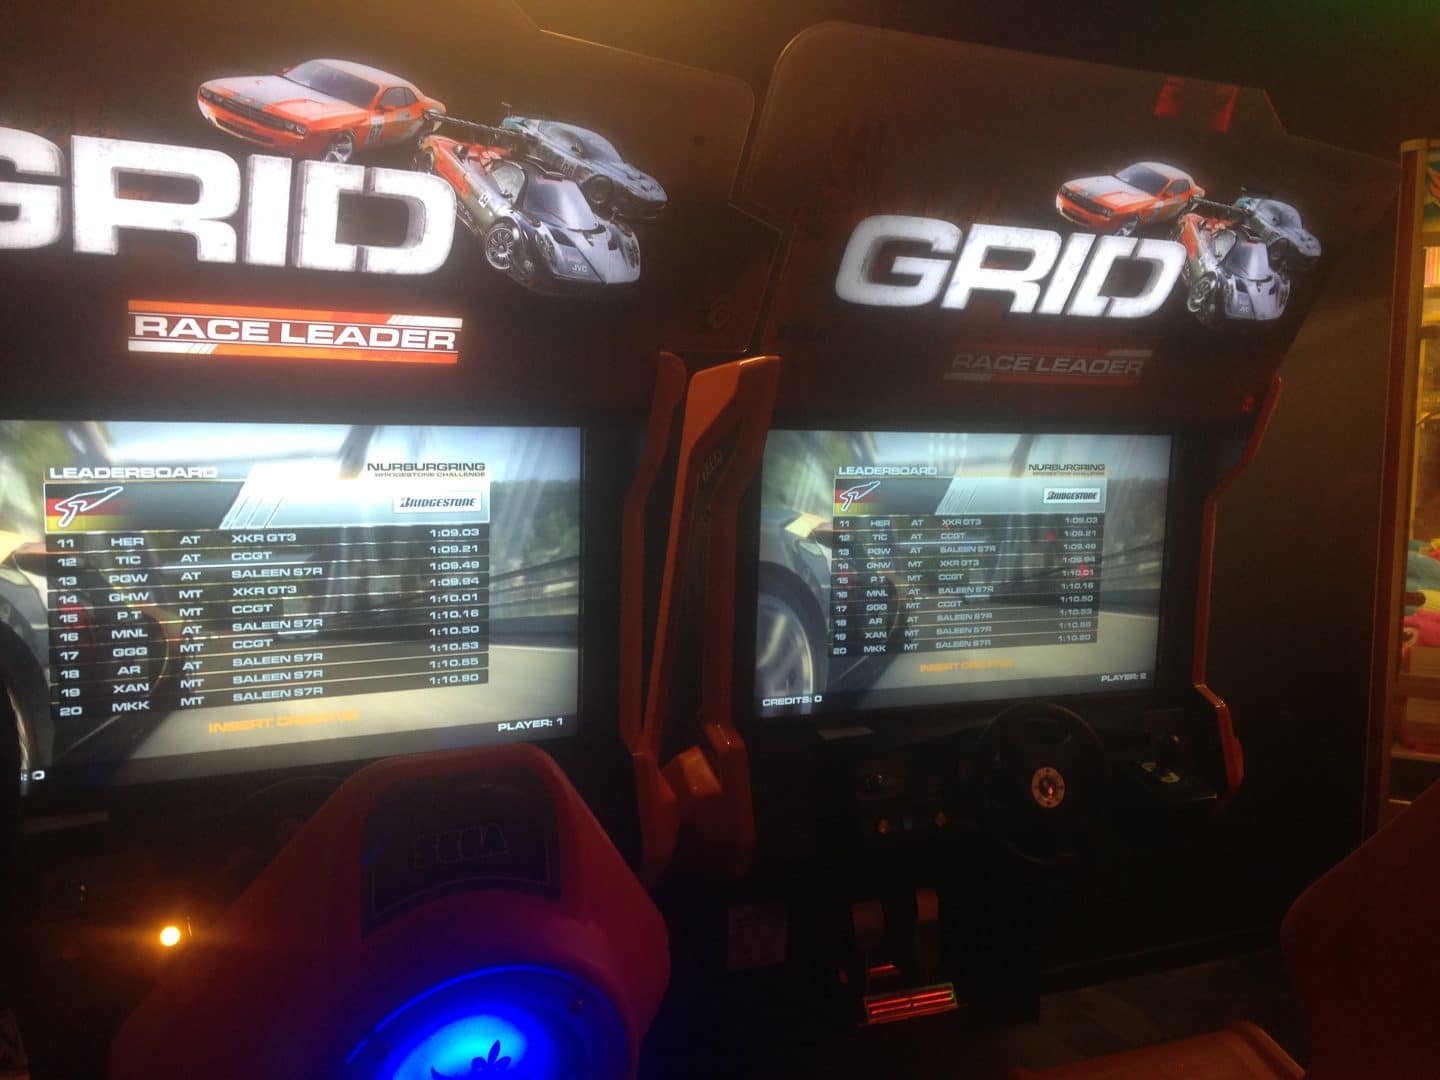 Grid Coin-Op??? what the hell?